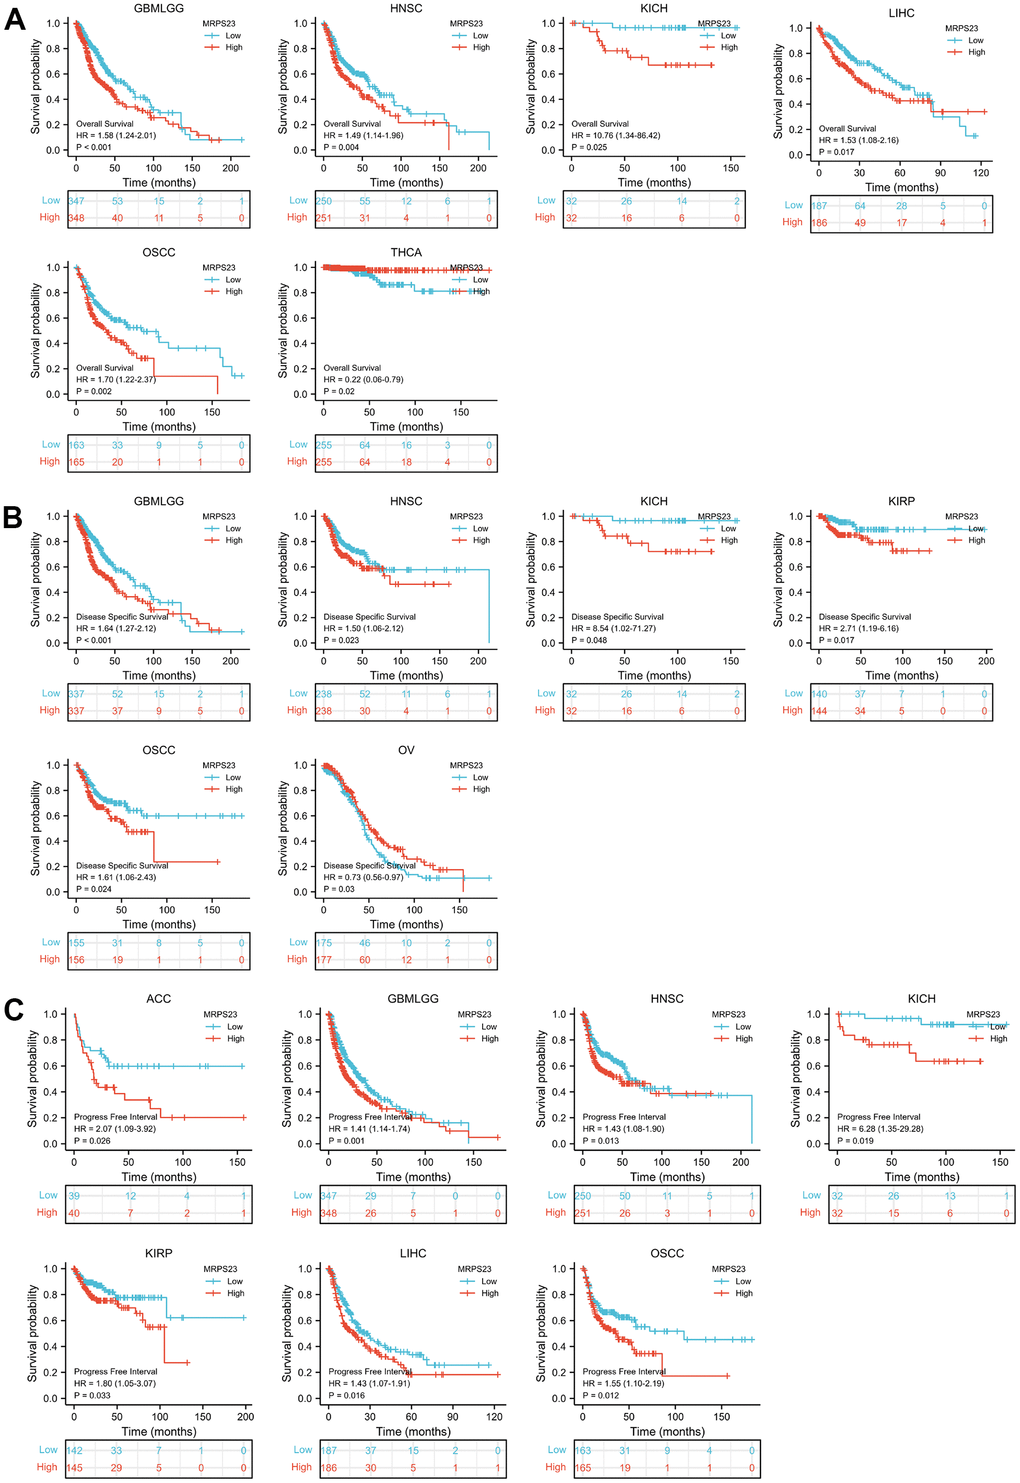 MRPS23 expression correlated with the prognosis values of pan-cancer. (A) The OS for MRPS23 in glioma, HNSC, KICH, LIHC, OSCC and THCA. (B) The DSS for MRPS23 in glioma, HNSC, LIHC, KICH, KIRP, OSCC and OV. (C) The PFI for MRPS23 in ACC, glioma, HNSC, KICH, KIRP, LIHC and OSCC.